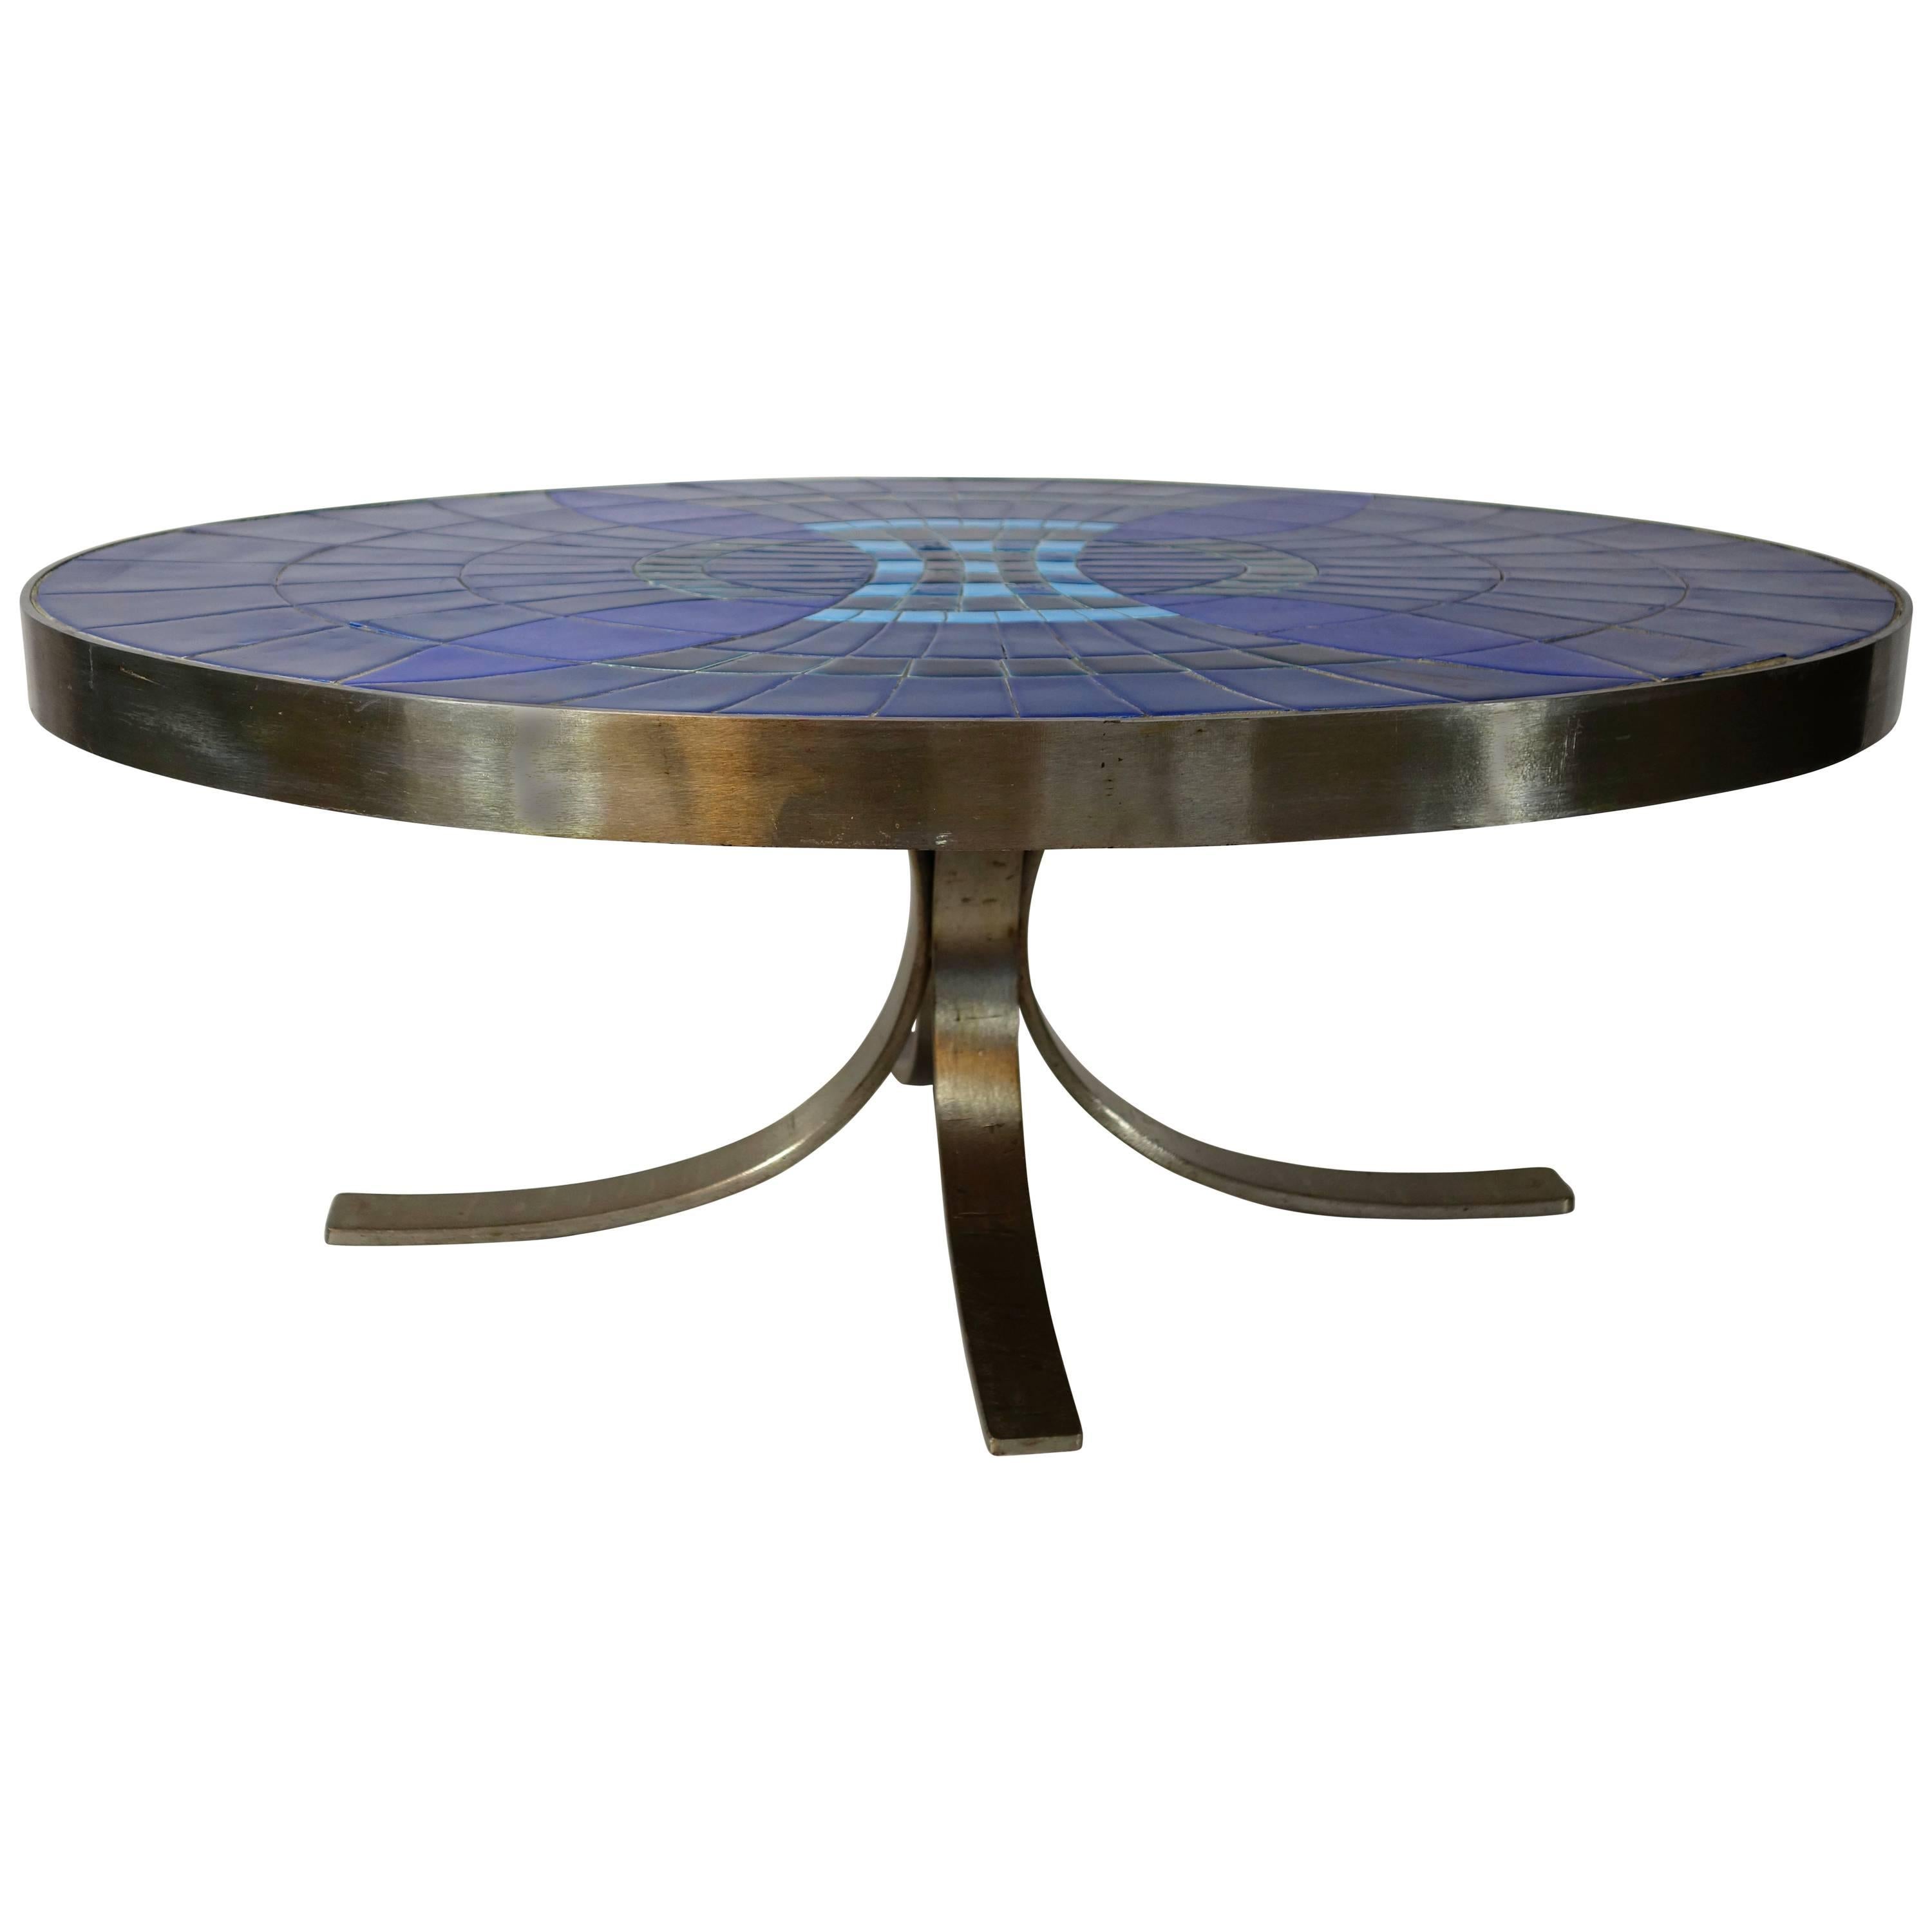 Midcentury Oval Steel Frame Cocktail or Coffee Table with blue tiles Guy Trévoux